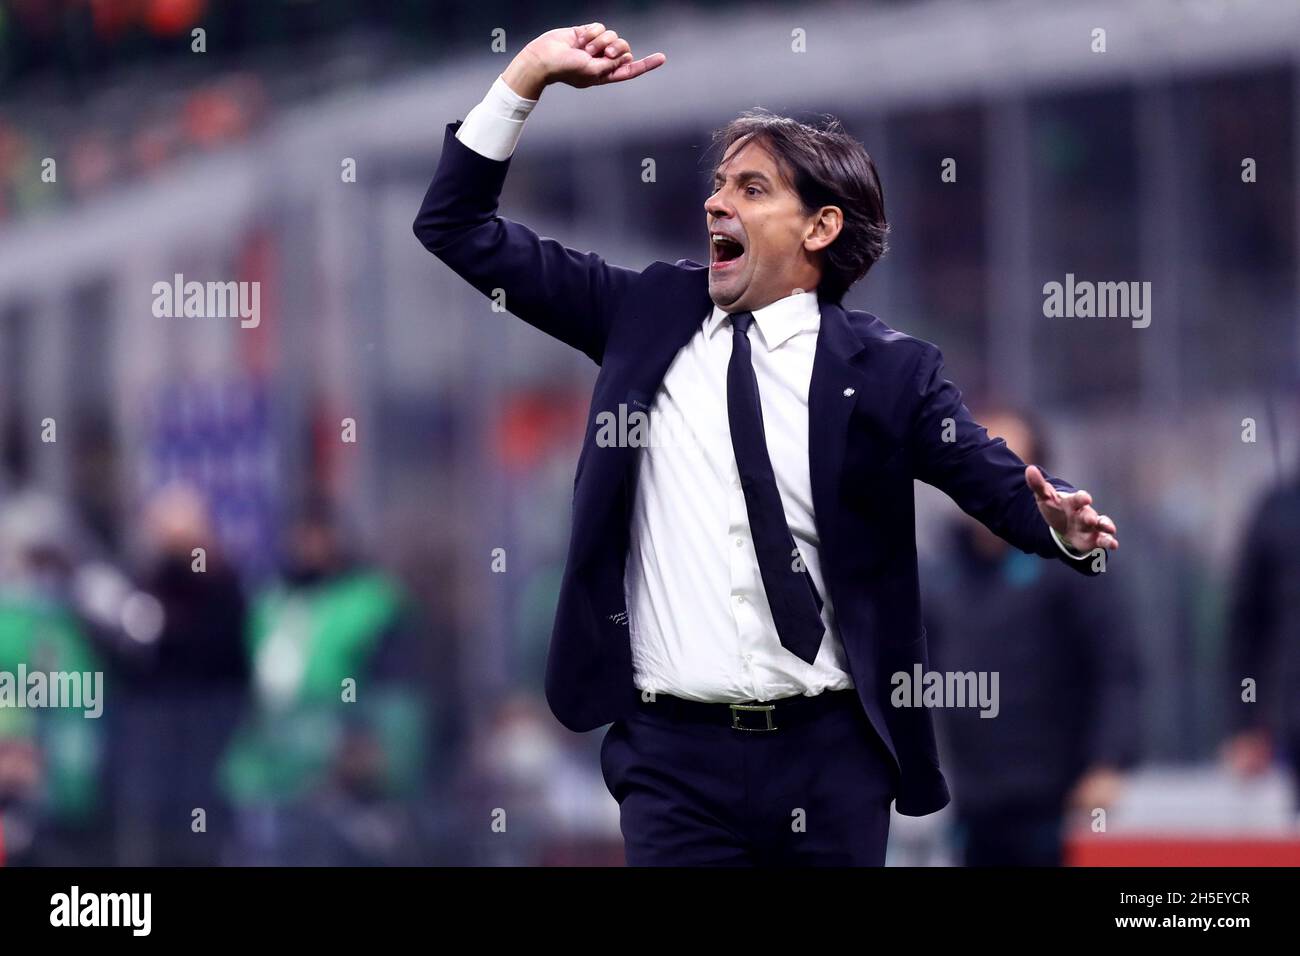 Simone Inzaghi, head coach of Fc Internazionale  gestures during the Serie A match between Ac Milan and Fc Internazionale. Stock Photo